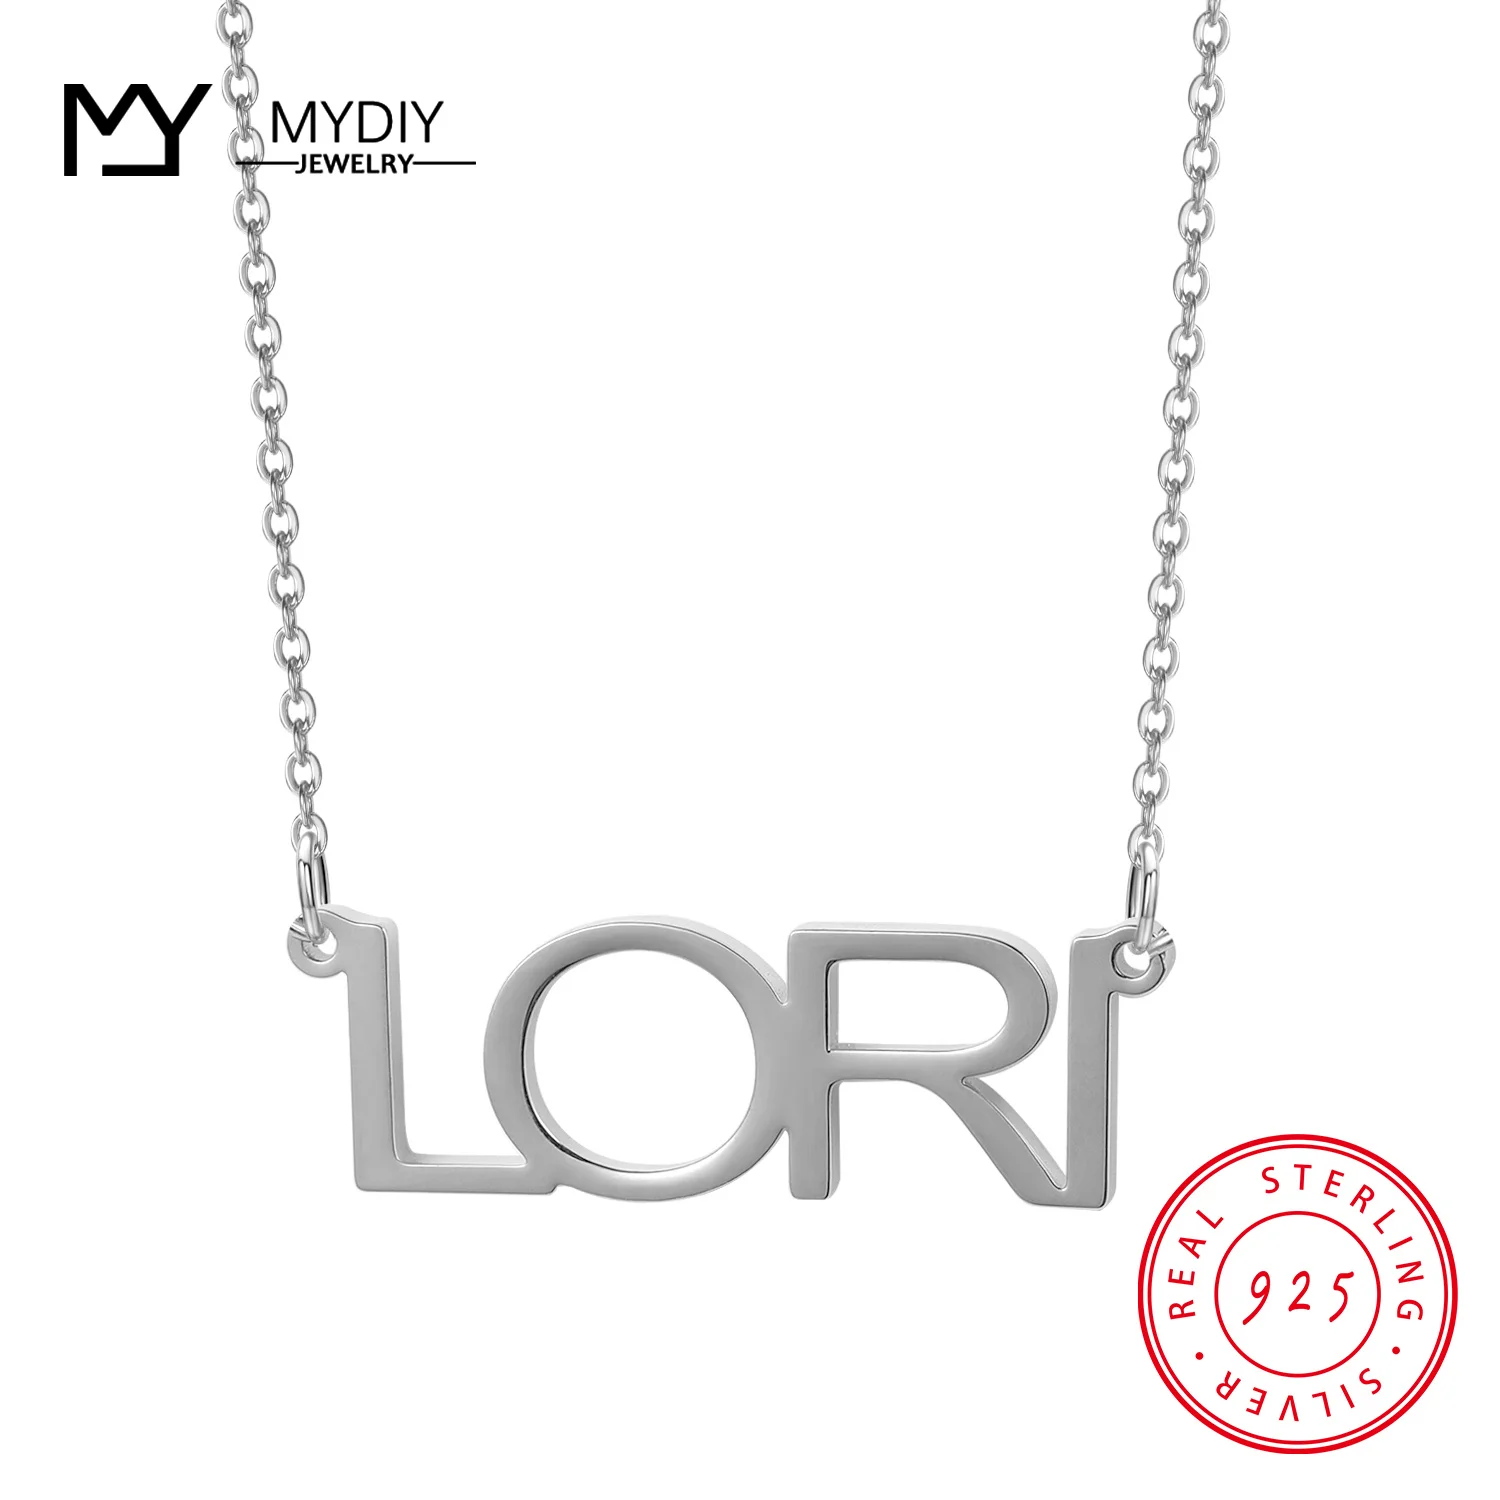 

MYDIY Custom Name Necklace 925 Stering Silver Customized Personalized Letter Rose Gold Choker Necklace Pendant Nameplate Gift